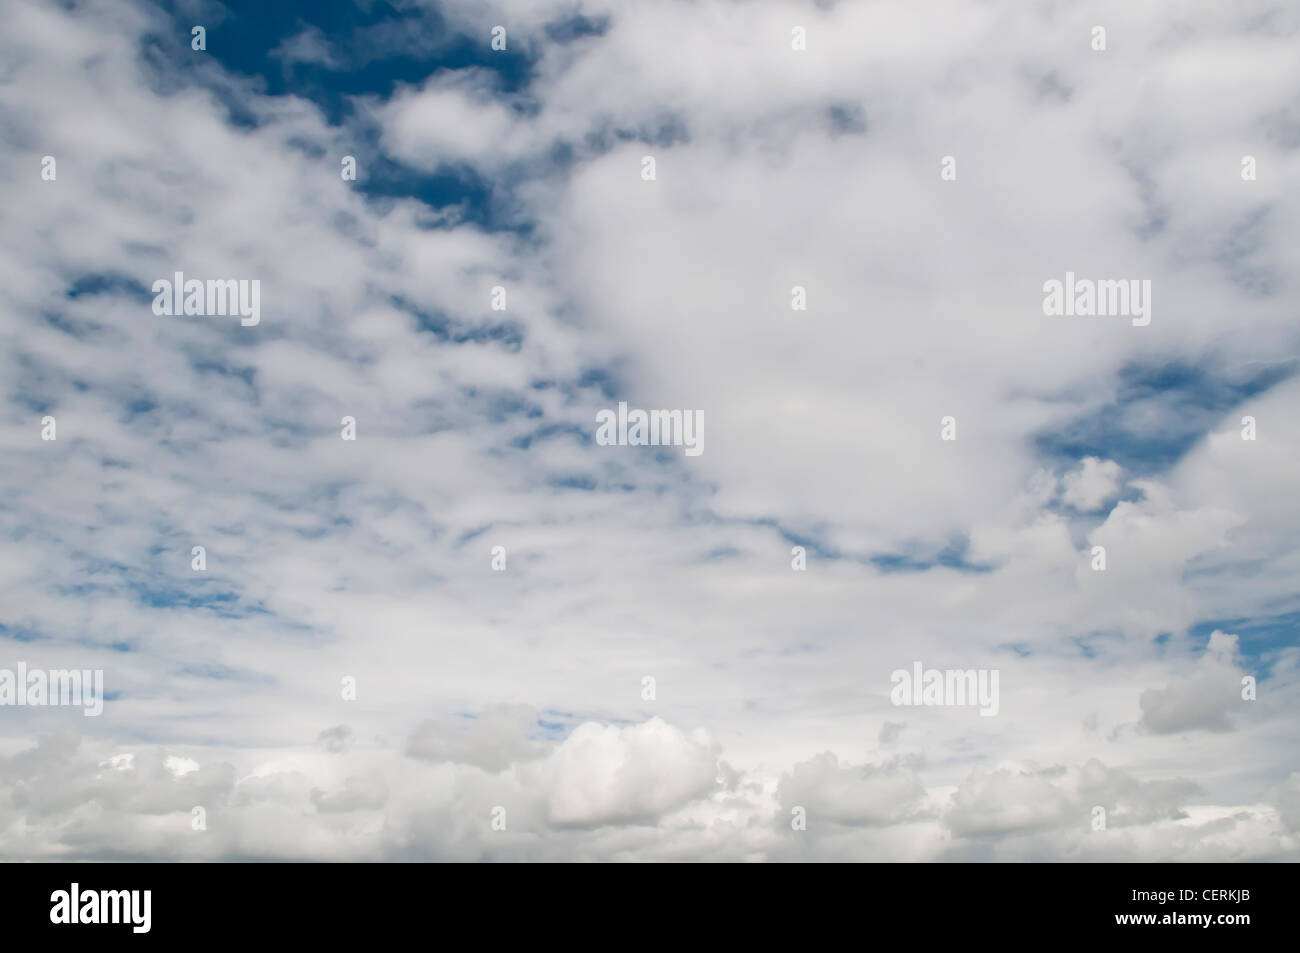 Blue sky with fluffy white clouds Stock Photo